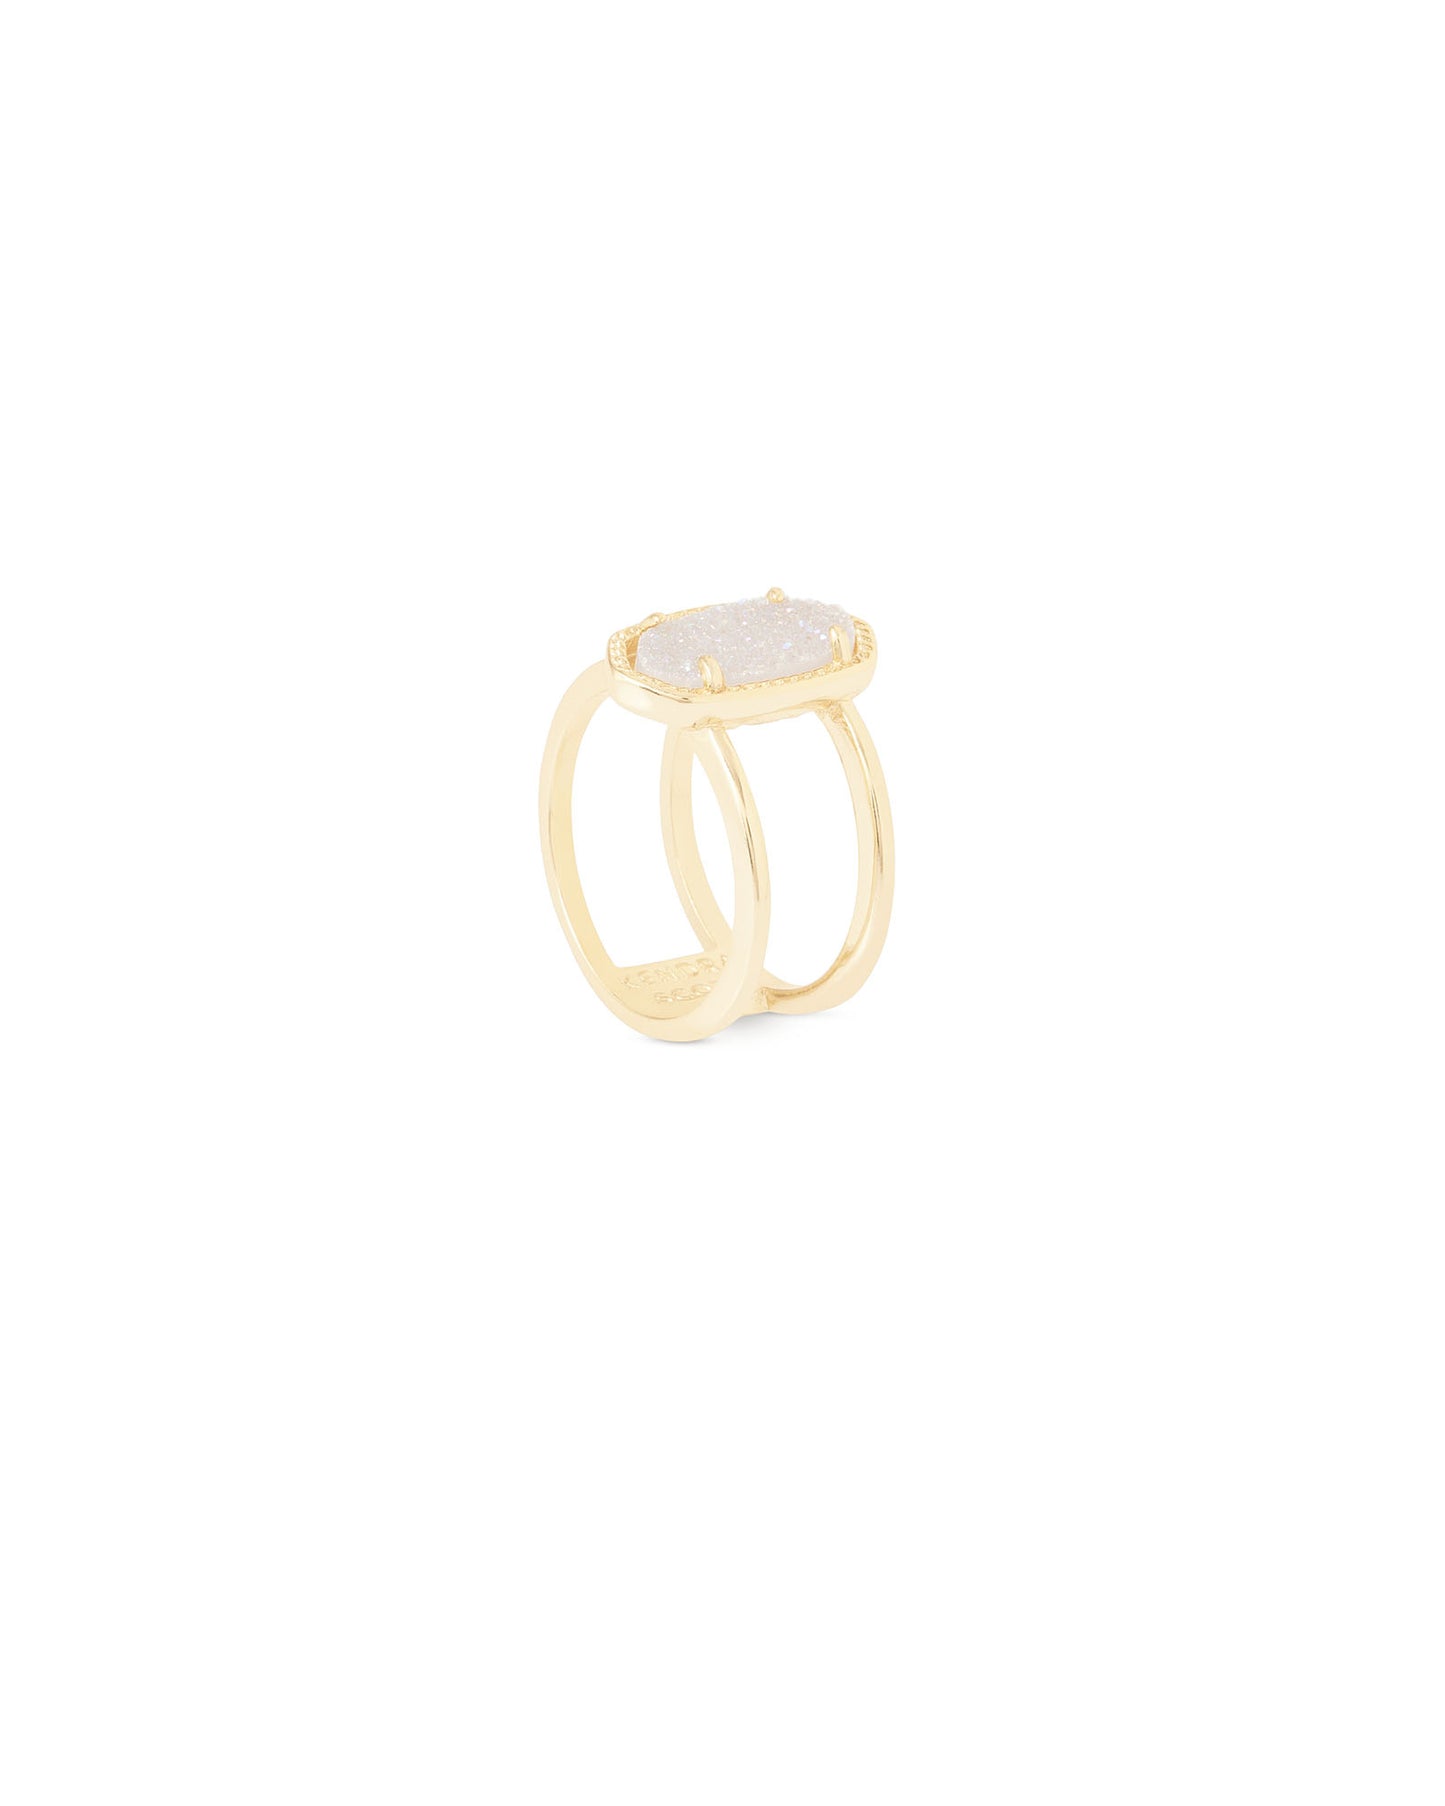 Kendra Scott Elyse Double Band Gold Ring - Iridescent Drusy-Necklace-Kendra Scott-APRIL2022, KS, R1052GLD-The Twisted Chandelier